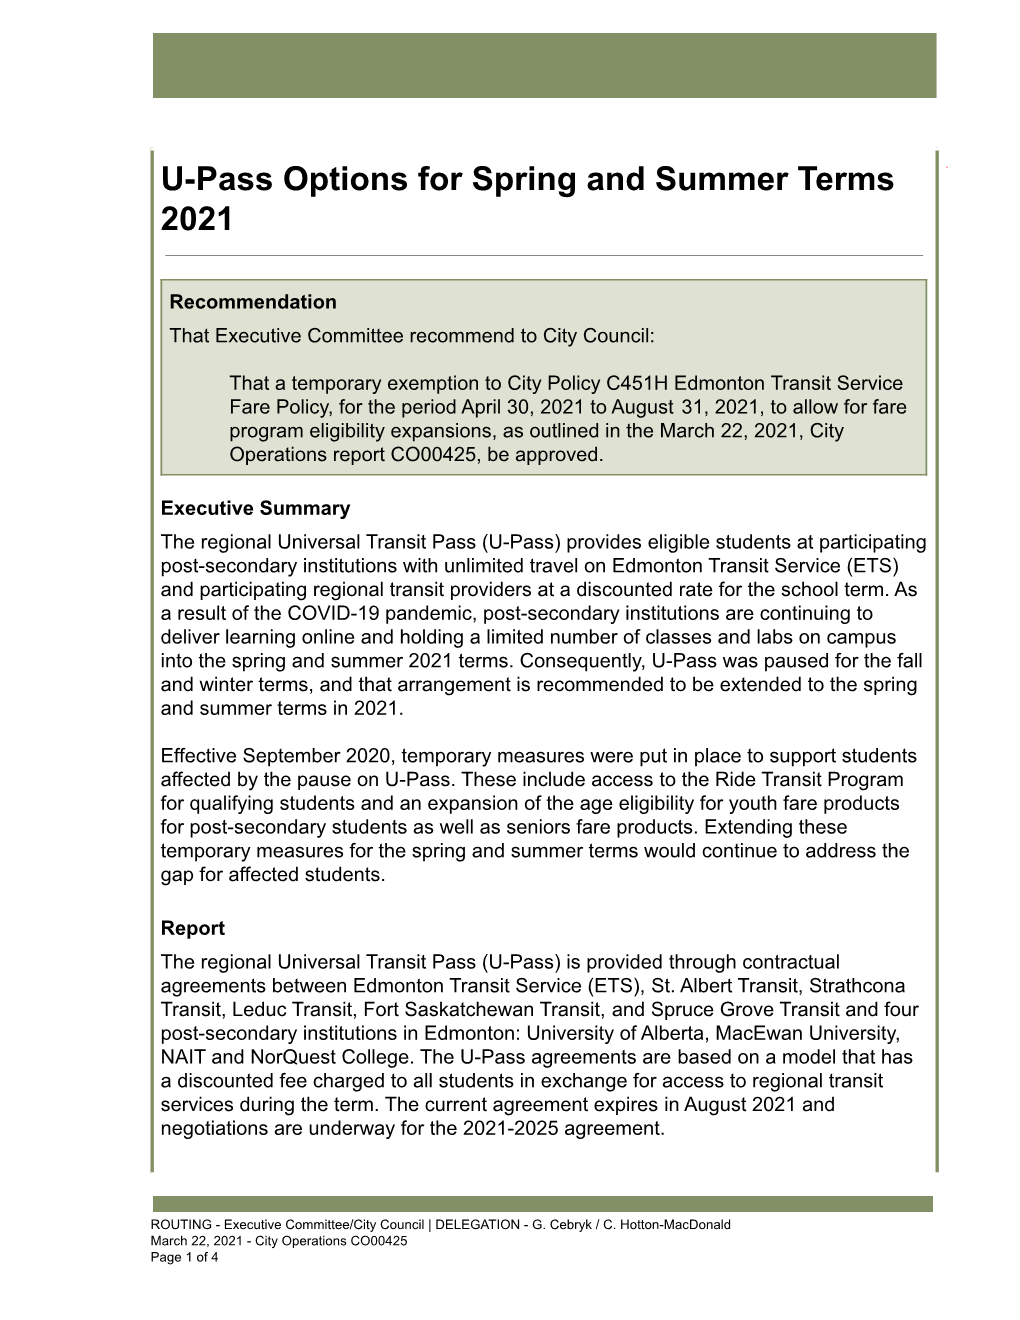 CO00425 U-Pass Options for Spring and Summer Terms 2021 Report.Pdf